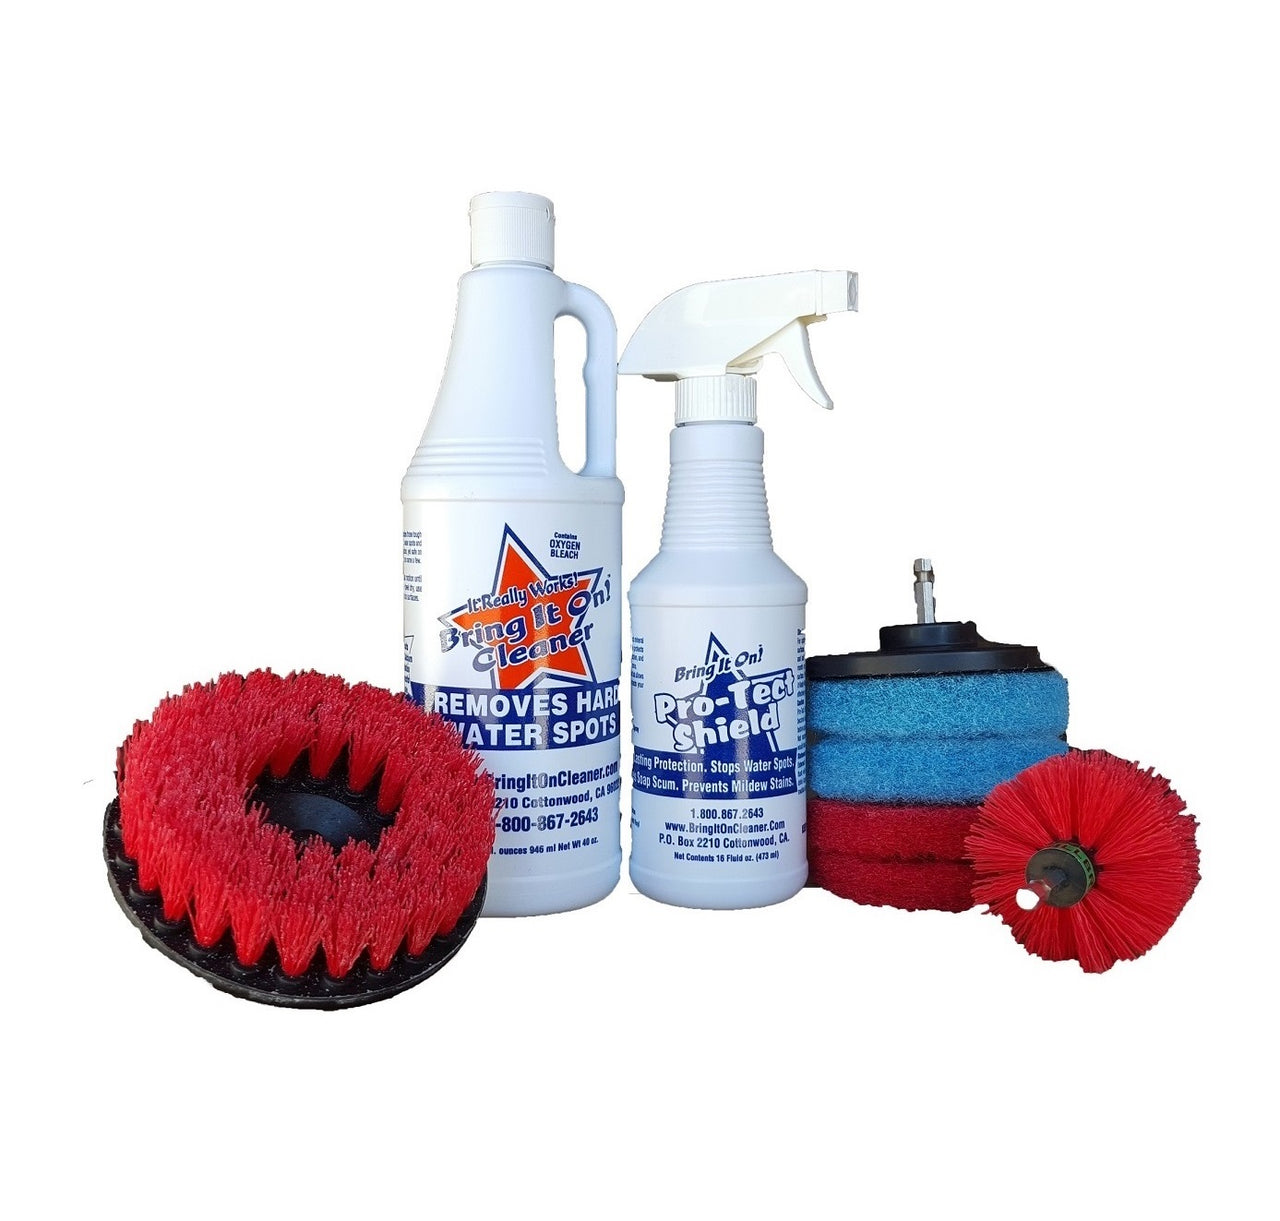 Hard Mineral Remover, Mold and Mildew Remover